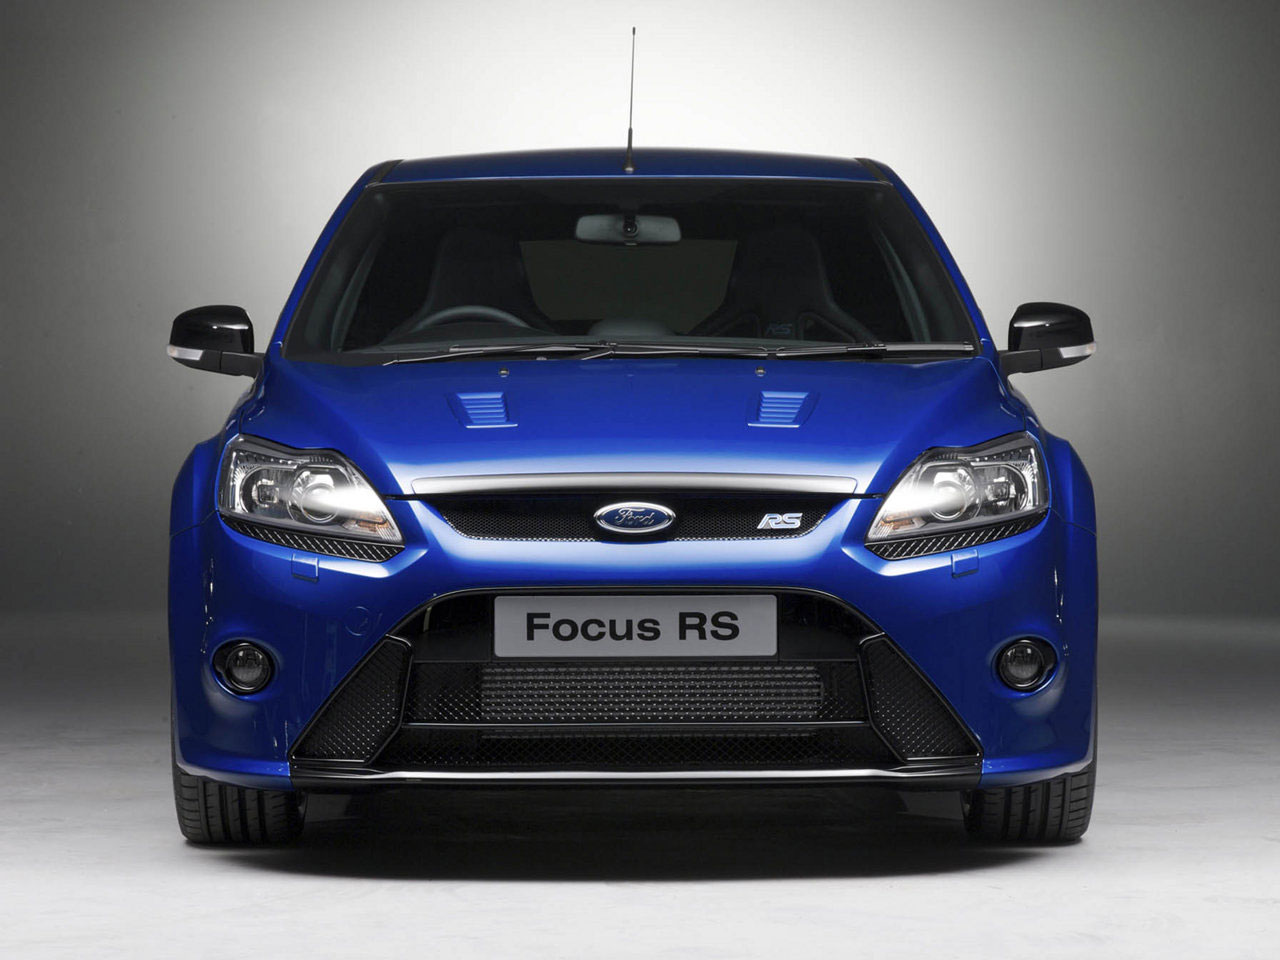 Gallery FORD Ford Focus RS 2009 Ford Focus RS wallpapers